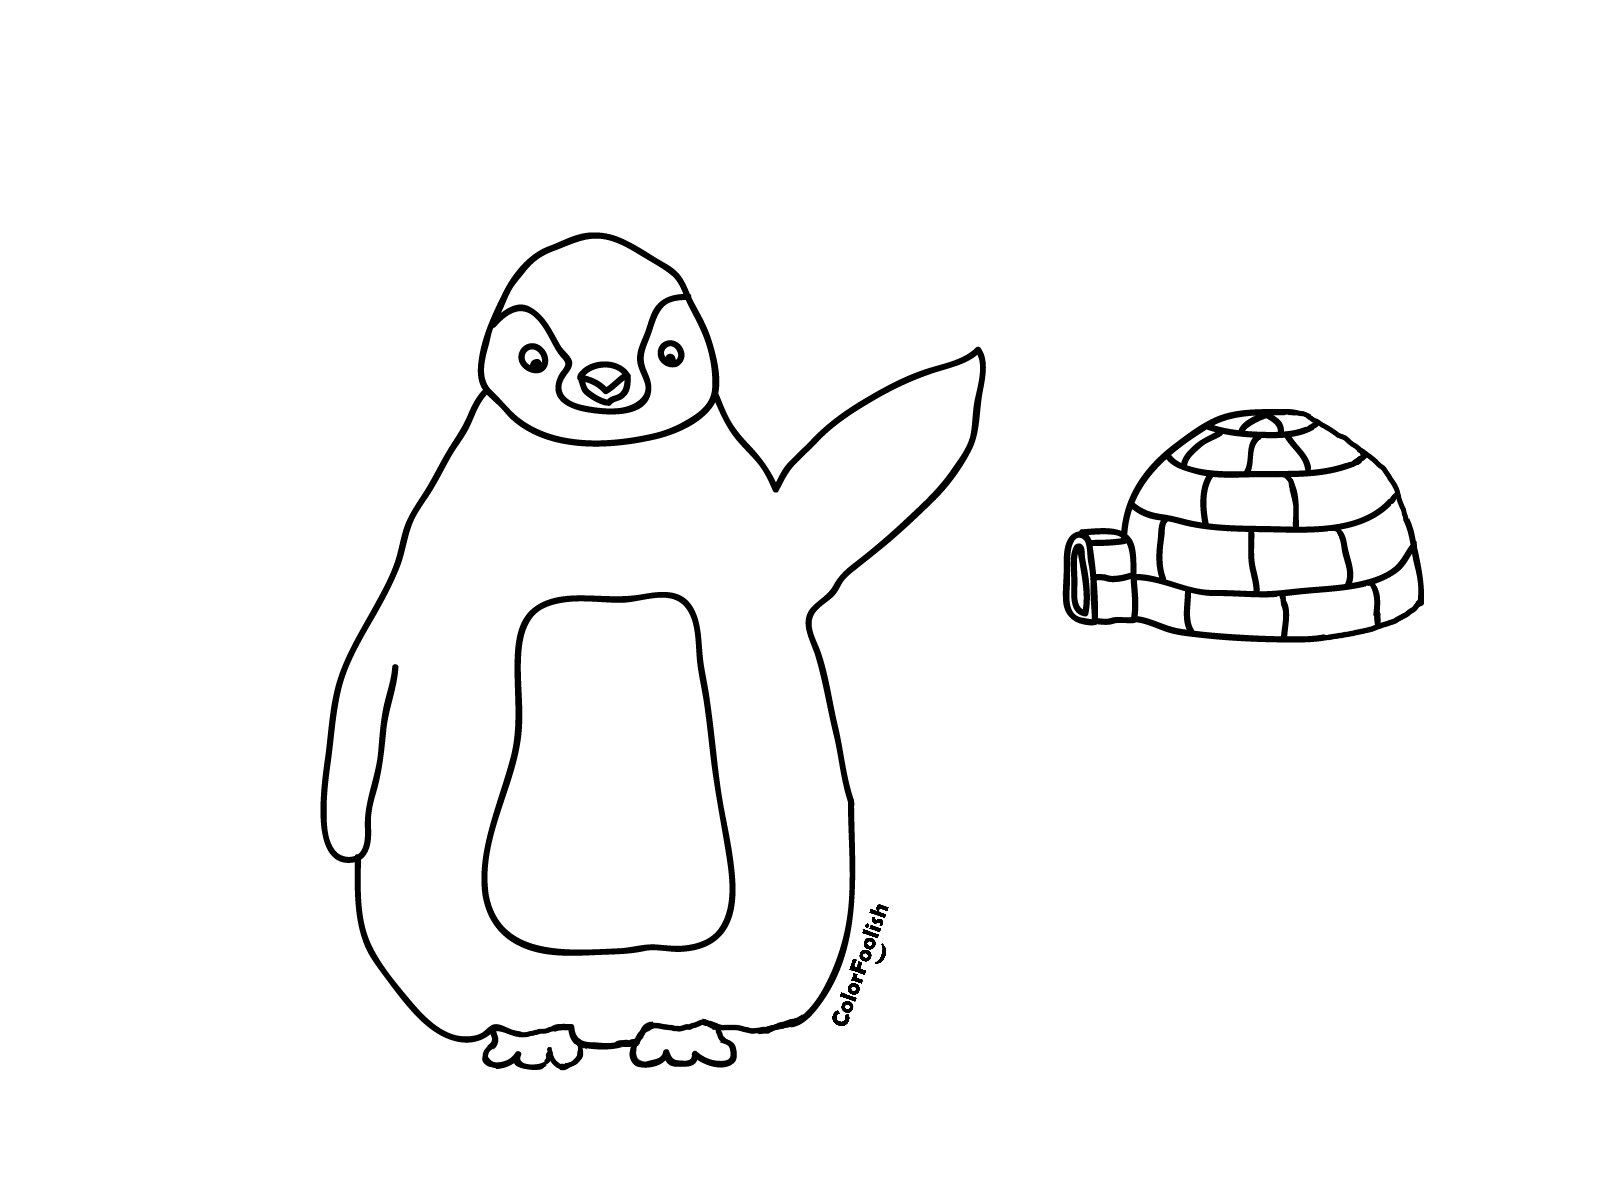 Coloring page of a penguin and an igloo